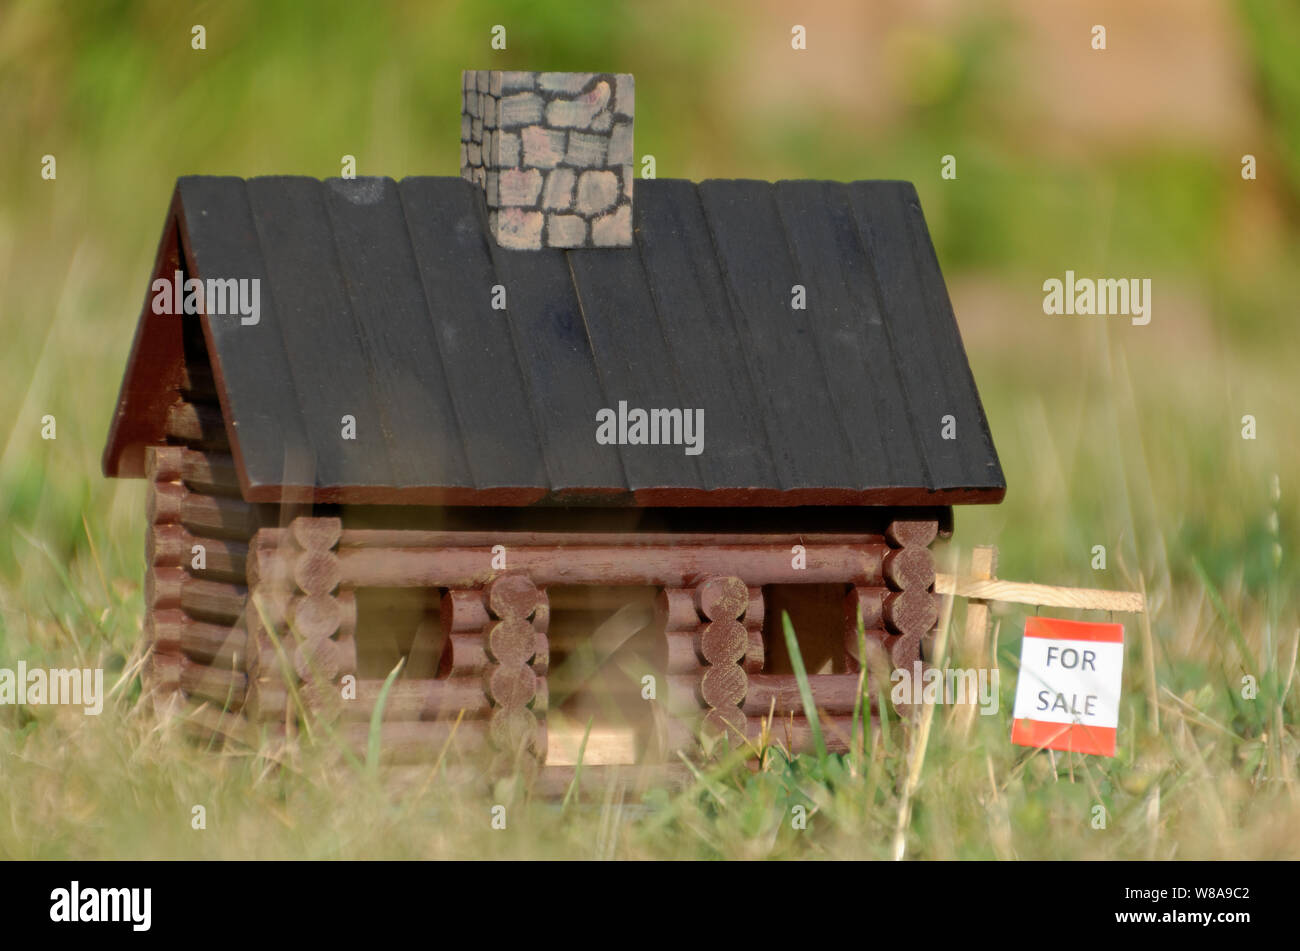 A miniature house with a for sale sign illustrates the concepts of real estate, housing market, tiny homes Stock Photo